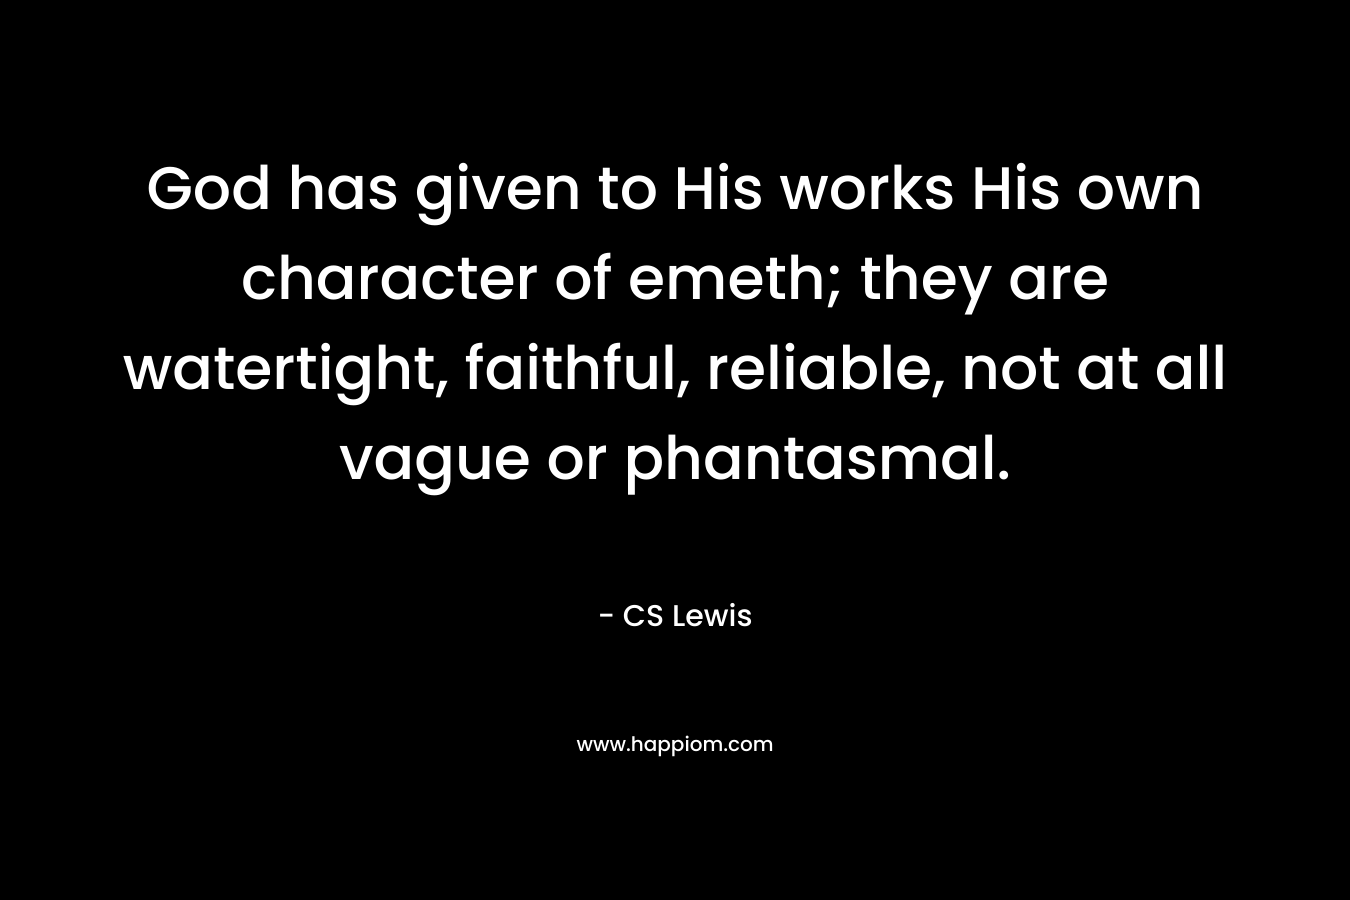 God has given to His works His own character of emeth; they are watertight, faithful, reliable, not at all vague or phantasmal. – CS Lewis